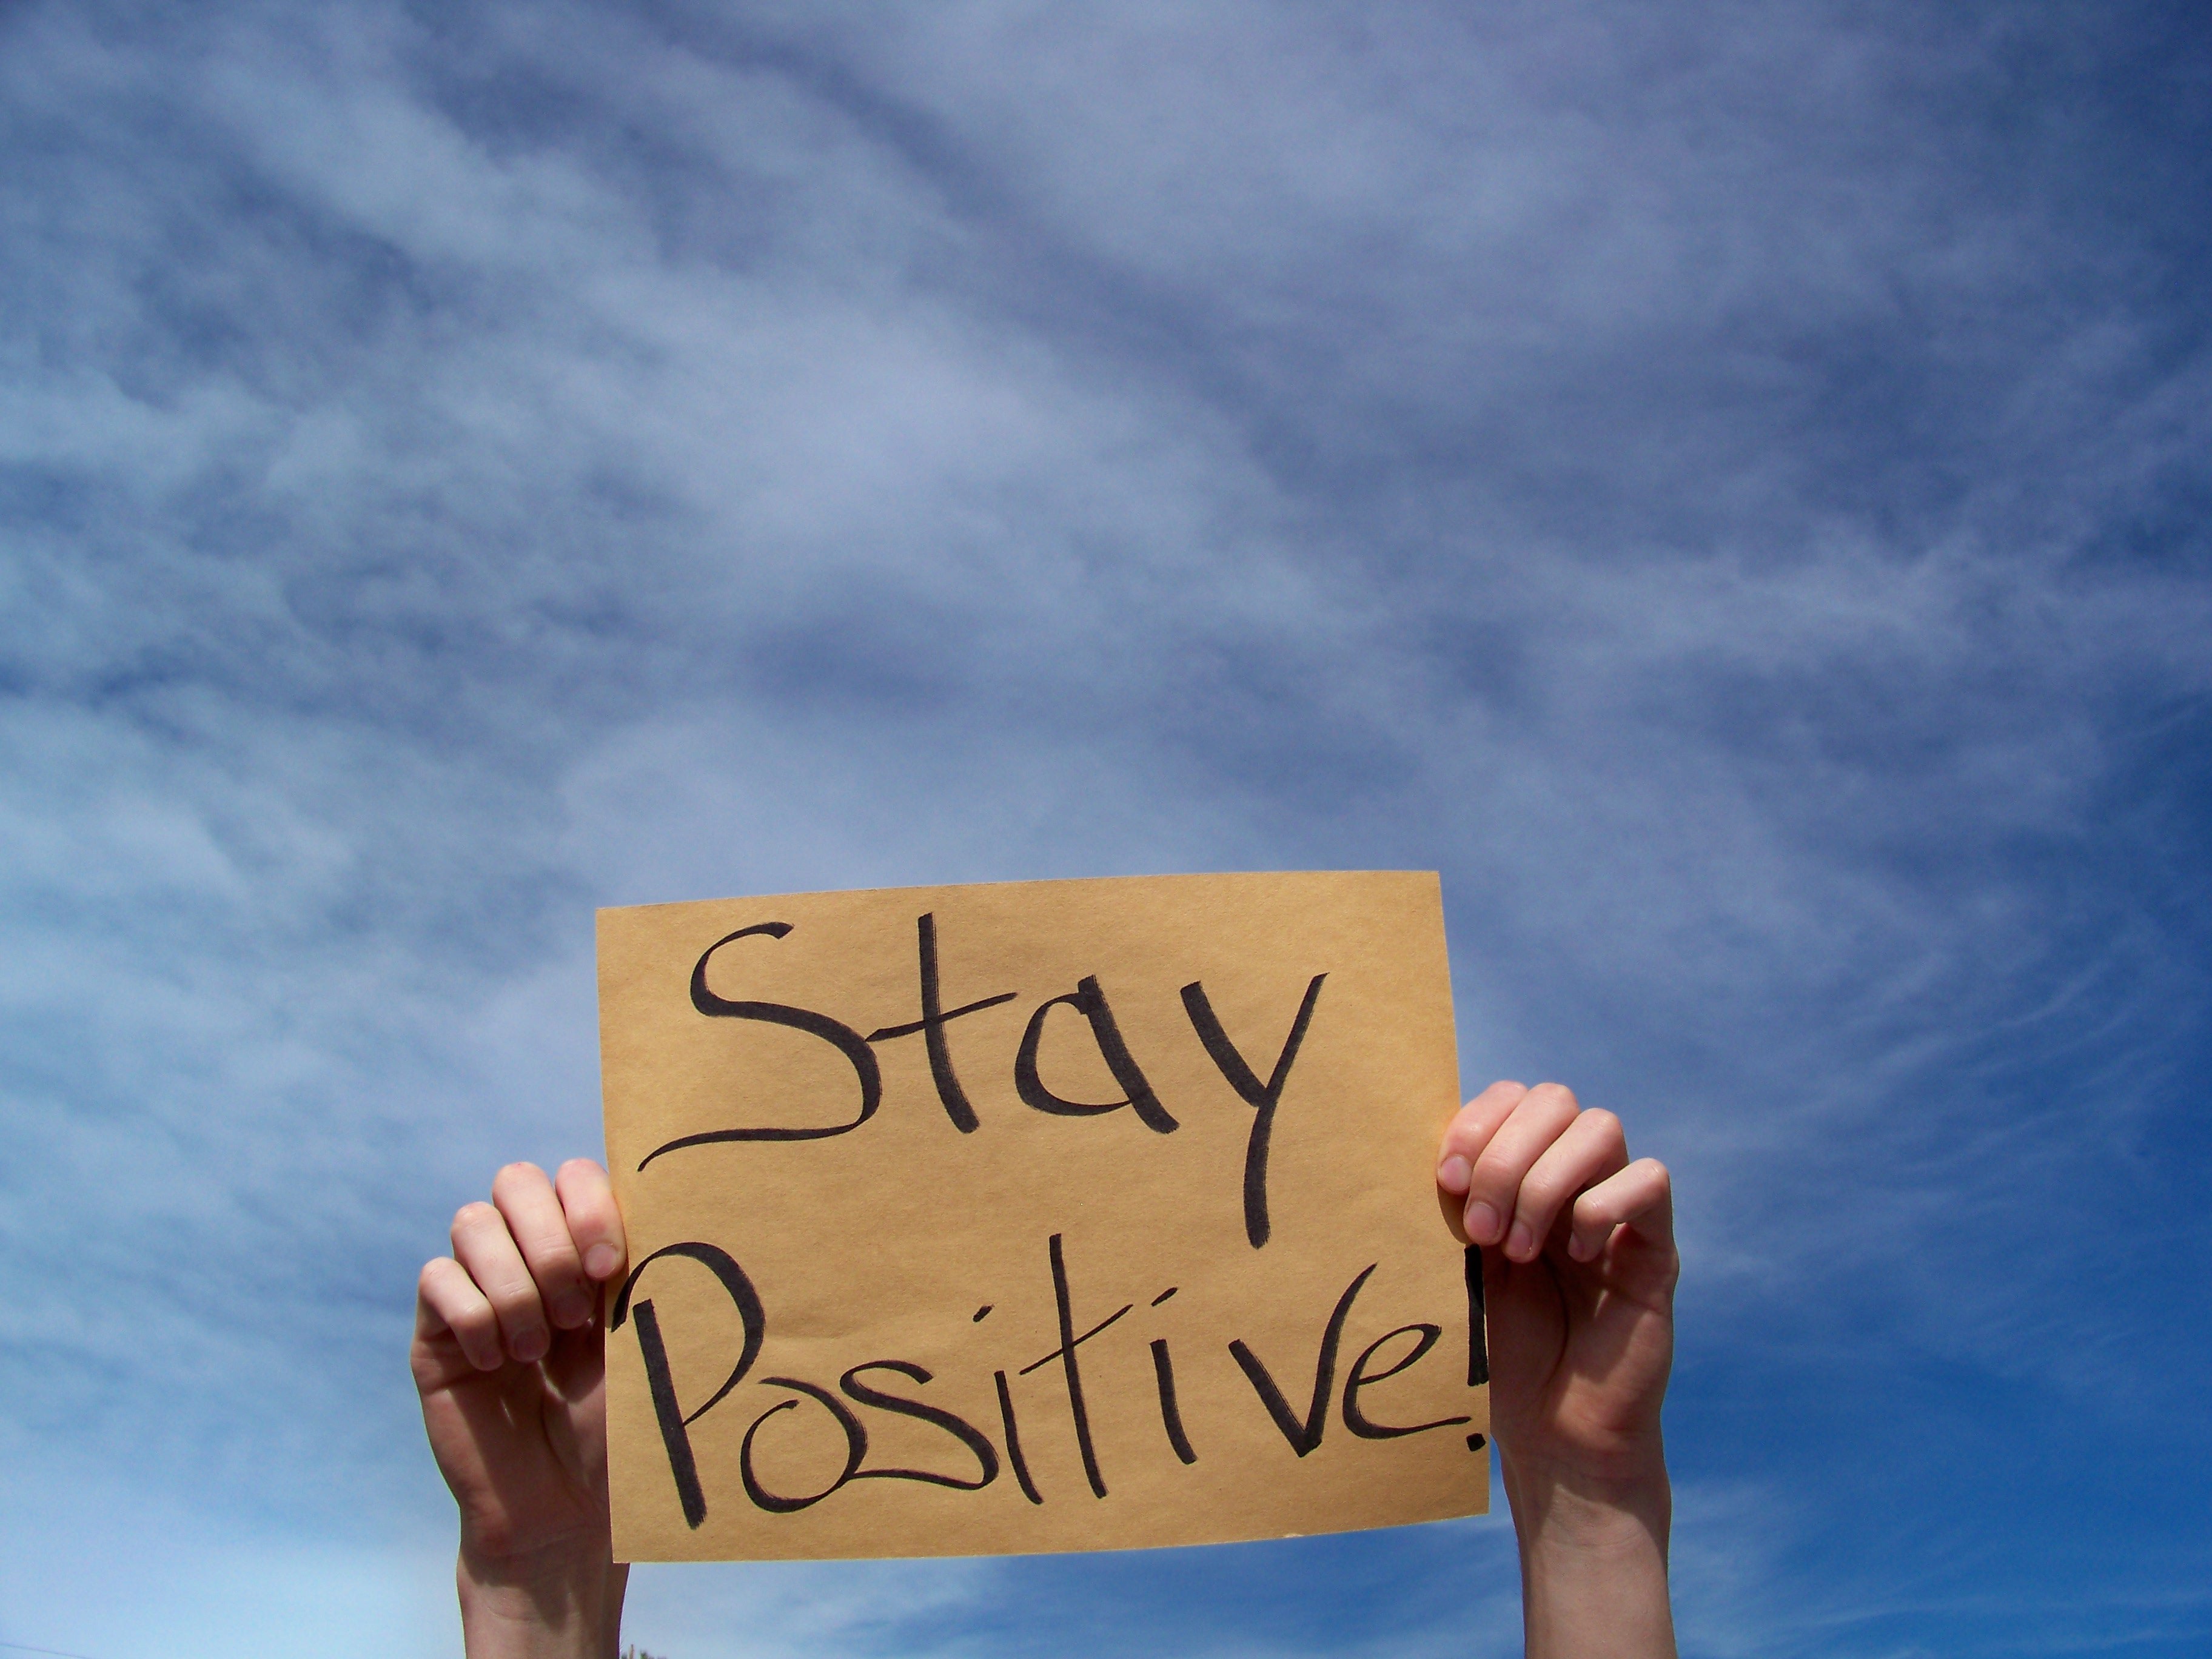 Positive wallpaper 3648x2736 - (#38089) - High Quality and ...